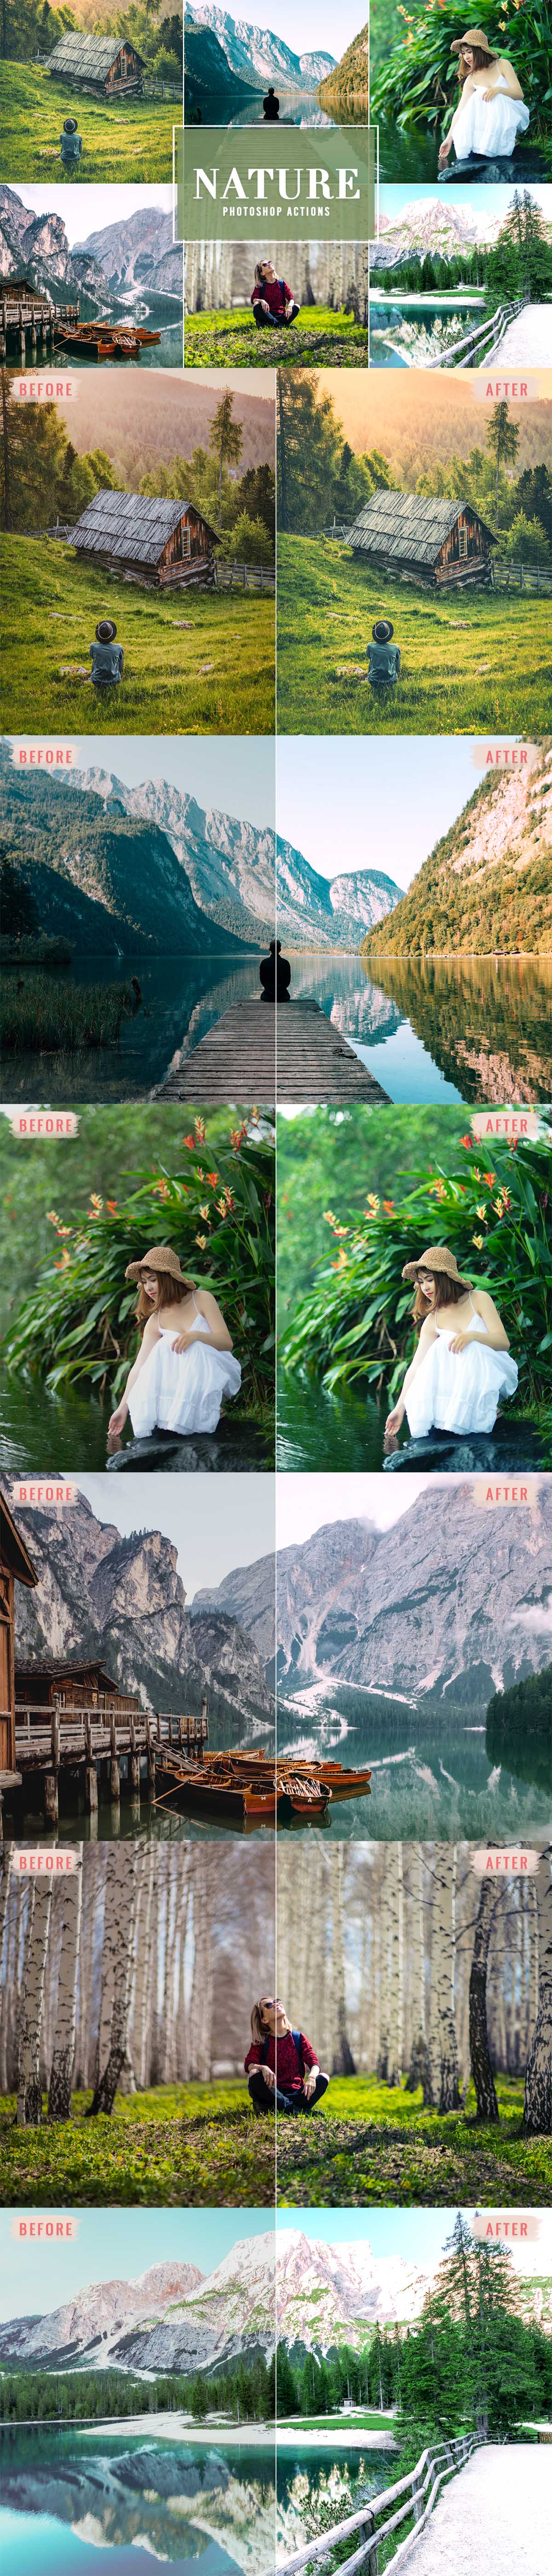 Free Nature Photoshop Actions